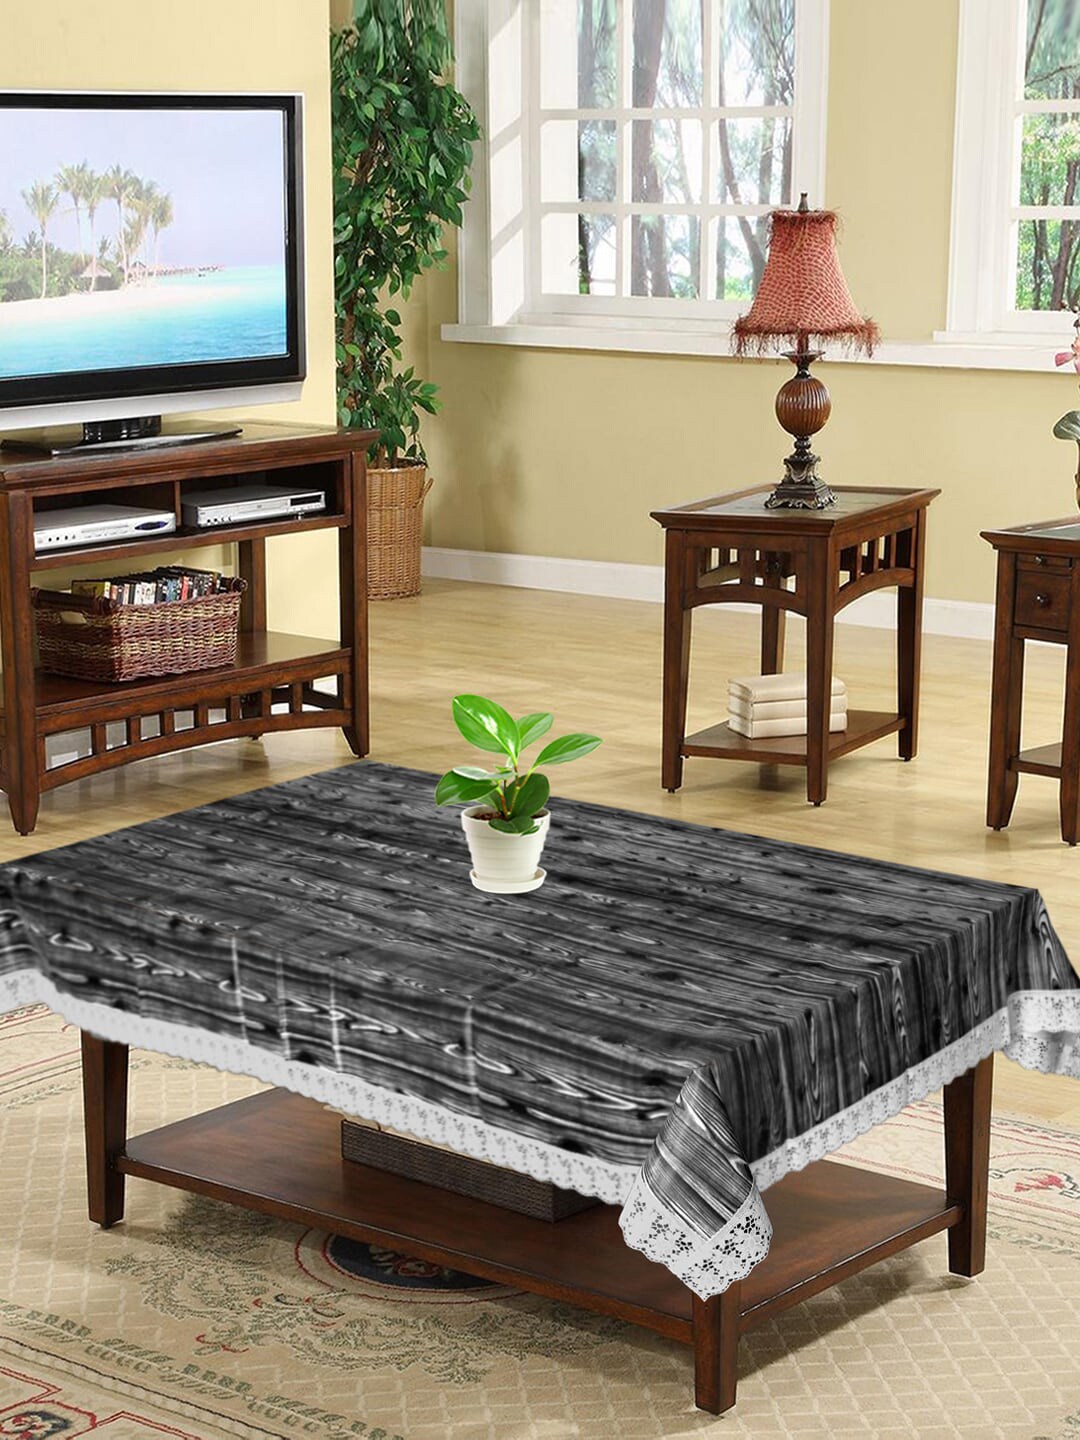 Kuber Industries Black & White Printed Rectangular 4-Seater Centre Table Cover Price in India